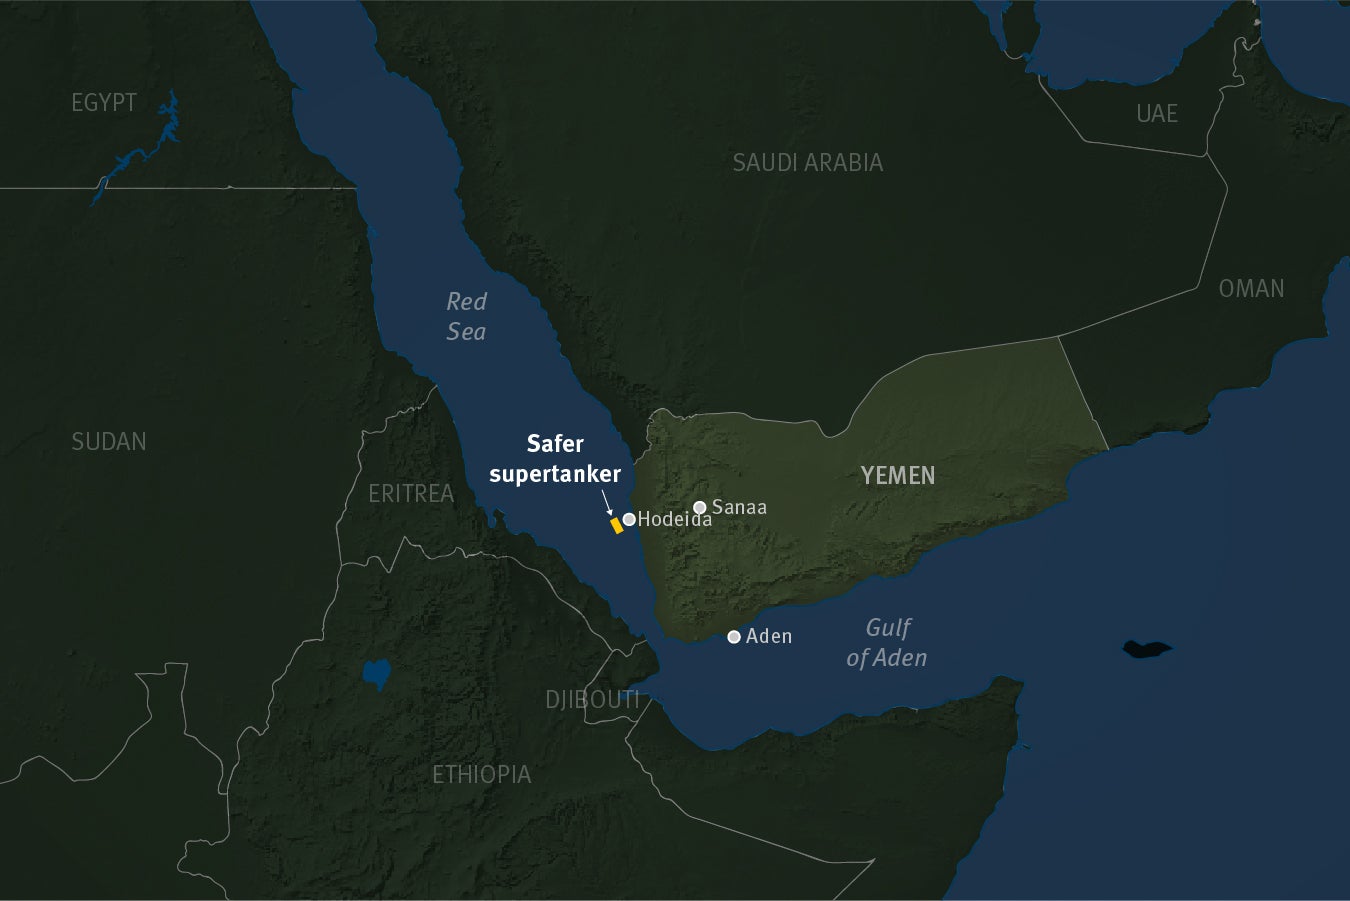 map of tanker location off the coast of Yemen